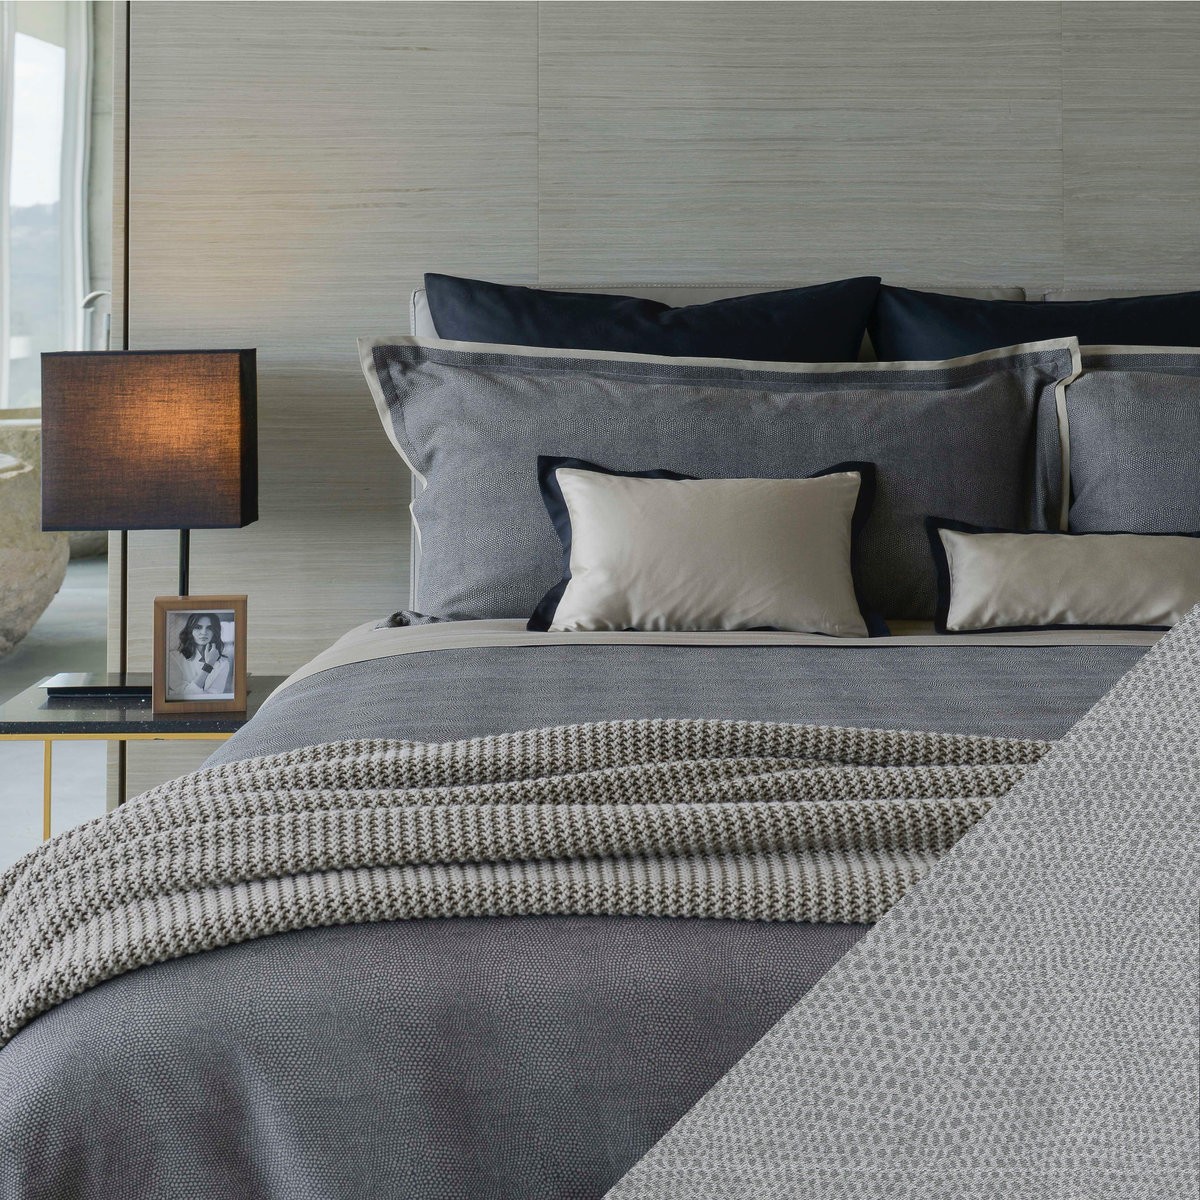 Lifestyle Shot Full Bed in Celso de Lemos Kroco Collection with Marbre Swatch